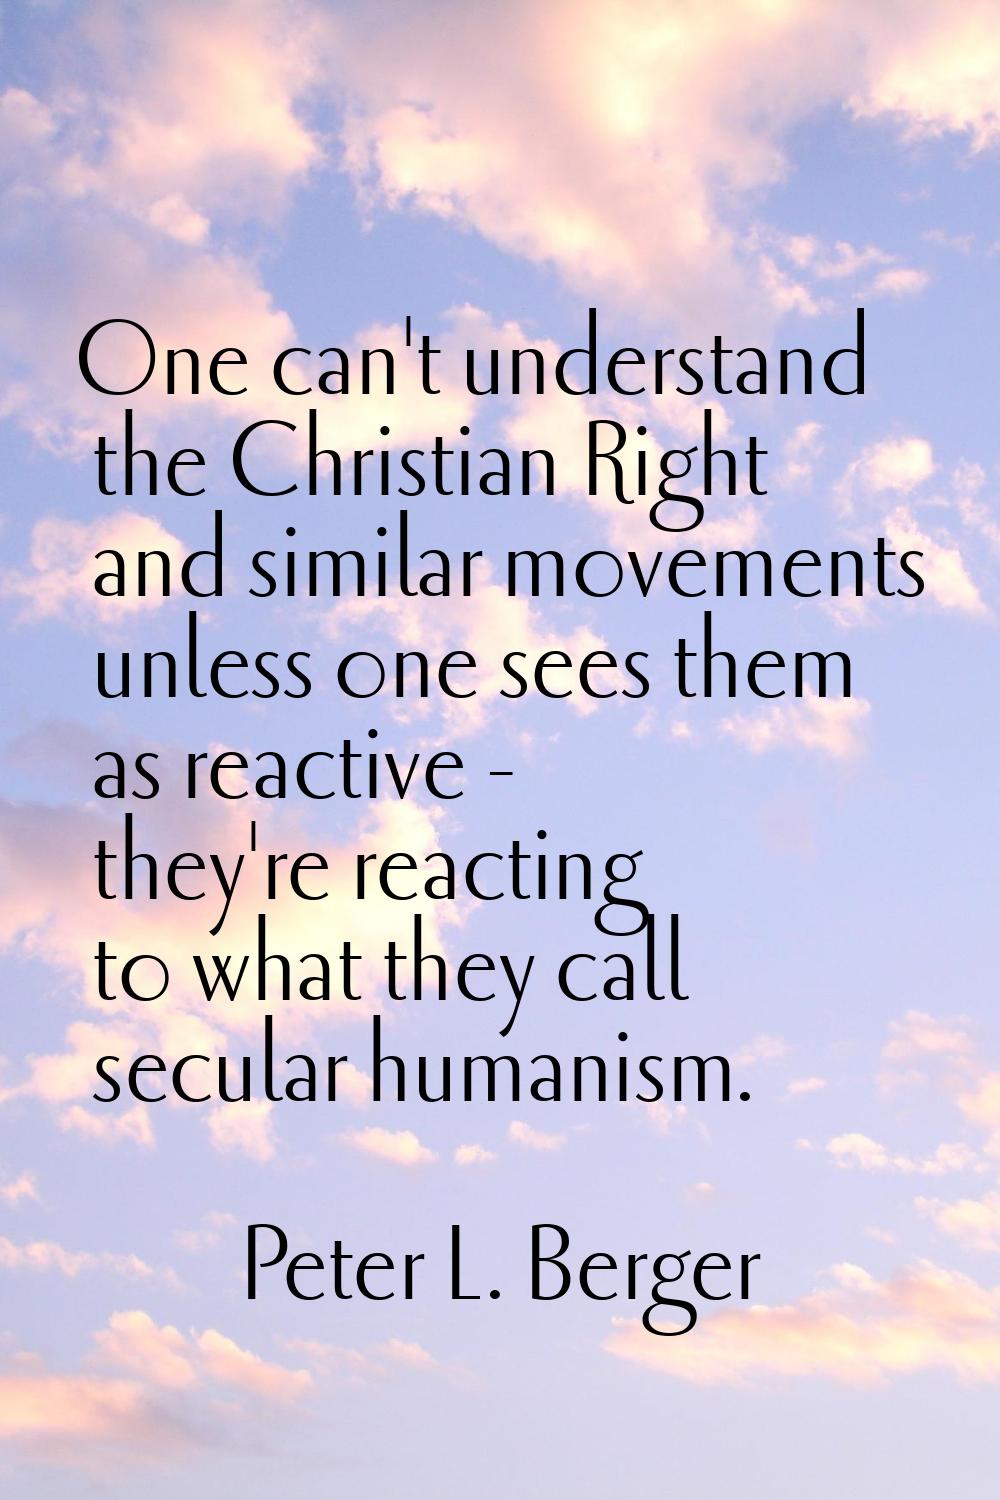 One can't understand the Christian Right and similar movements unless one sees them as reactive - t